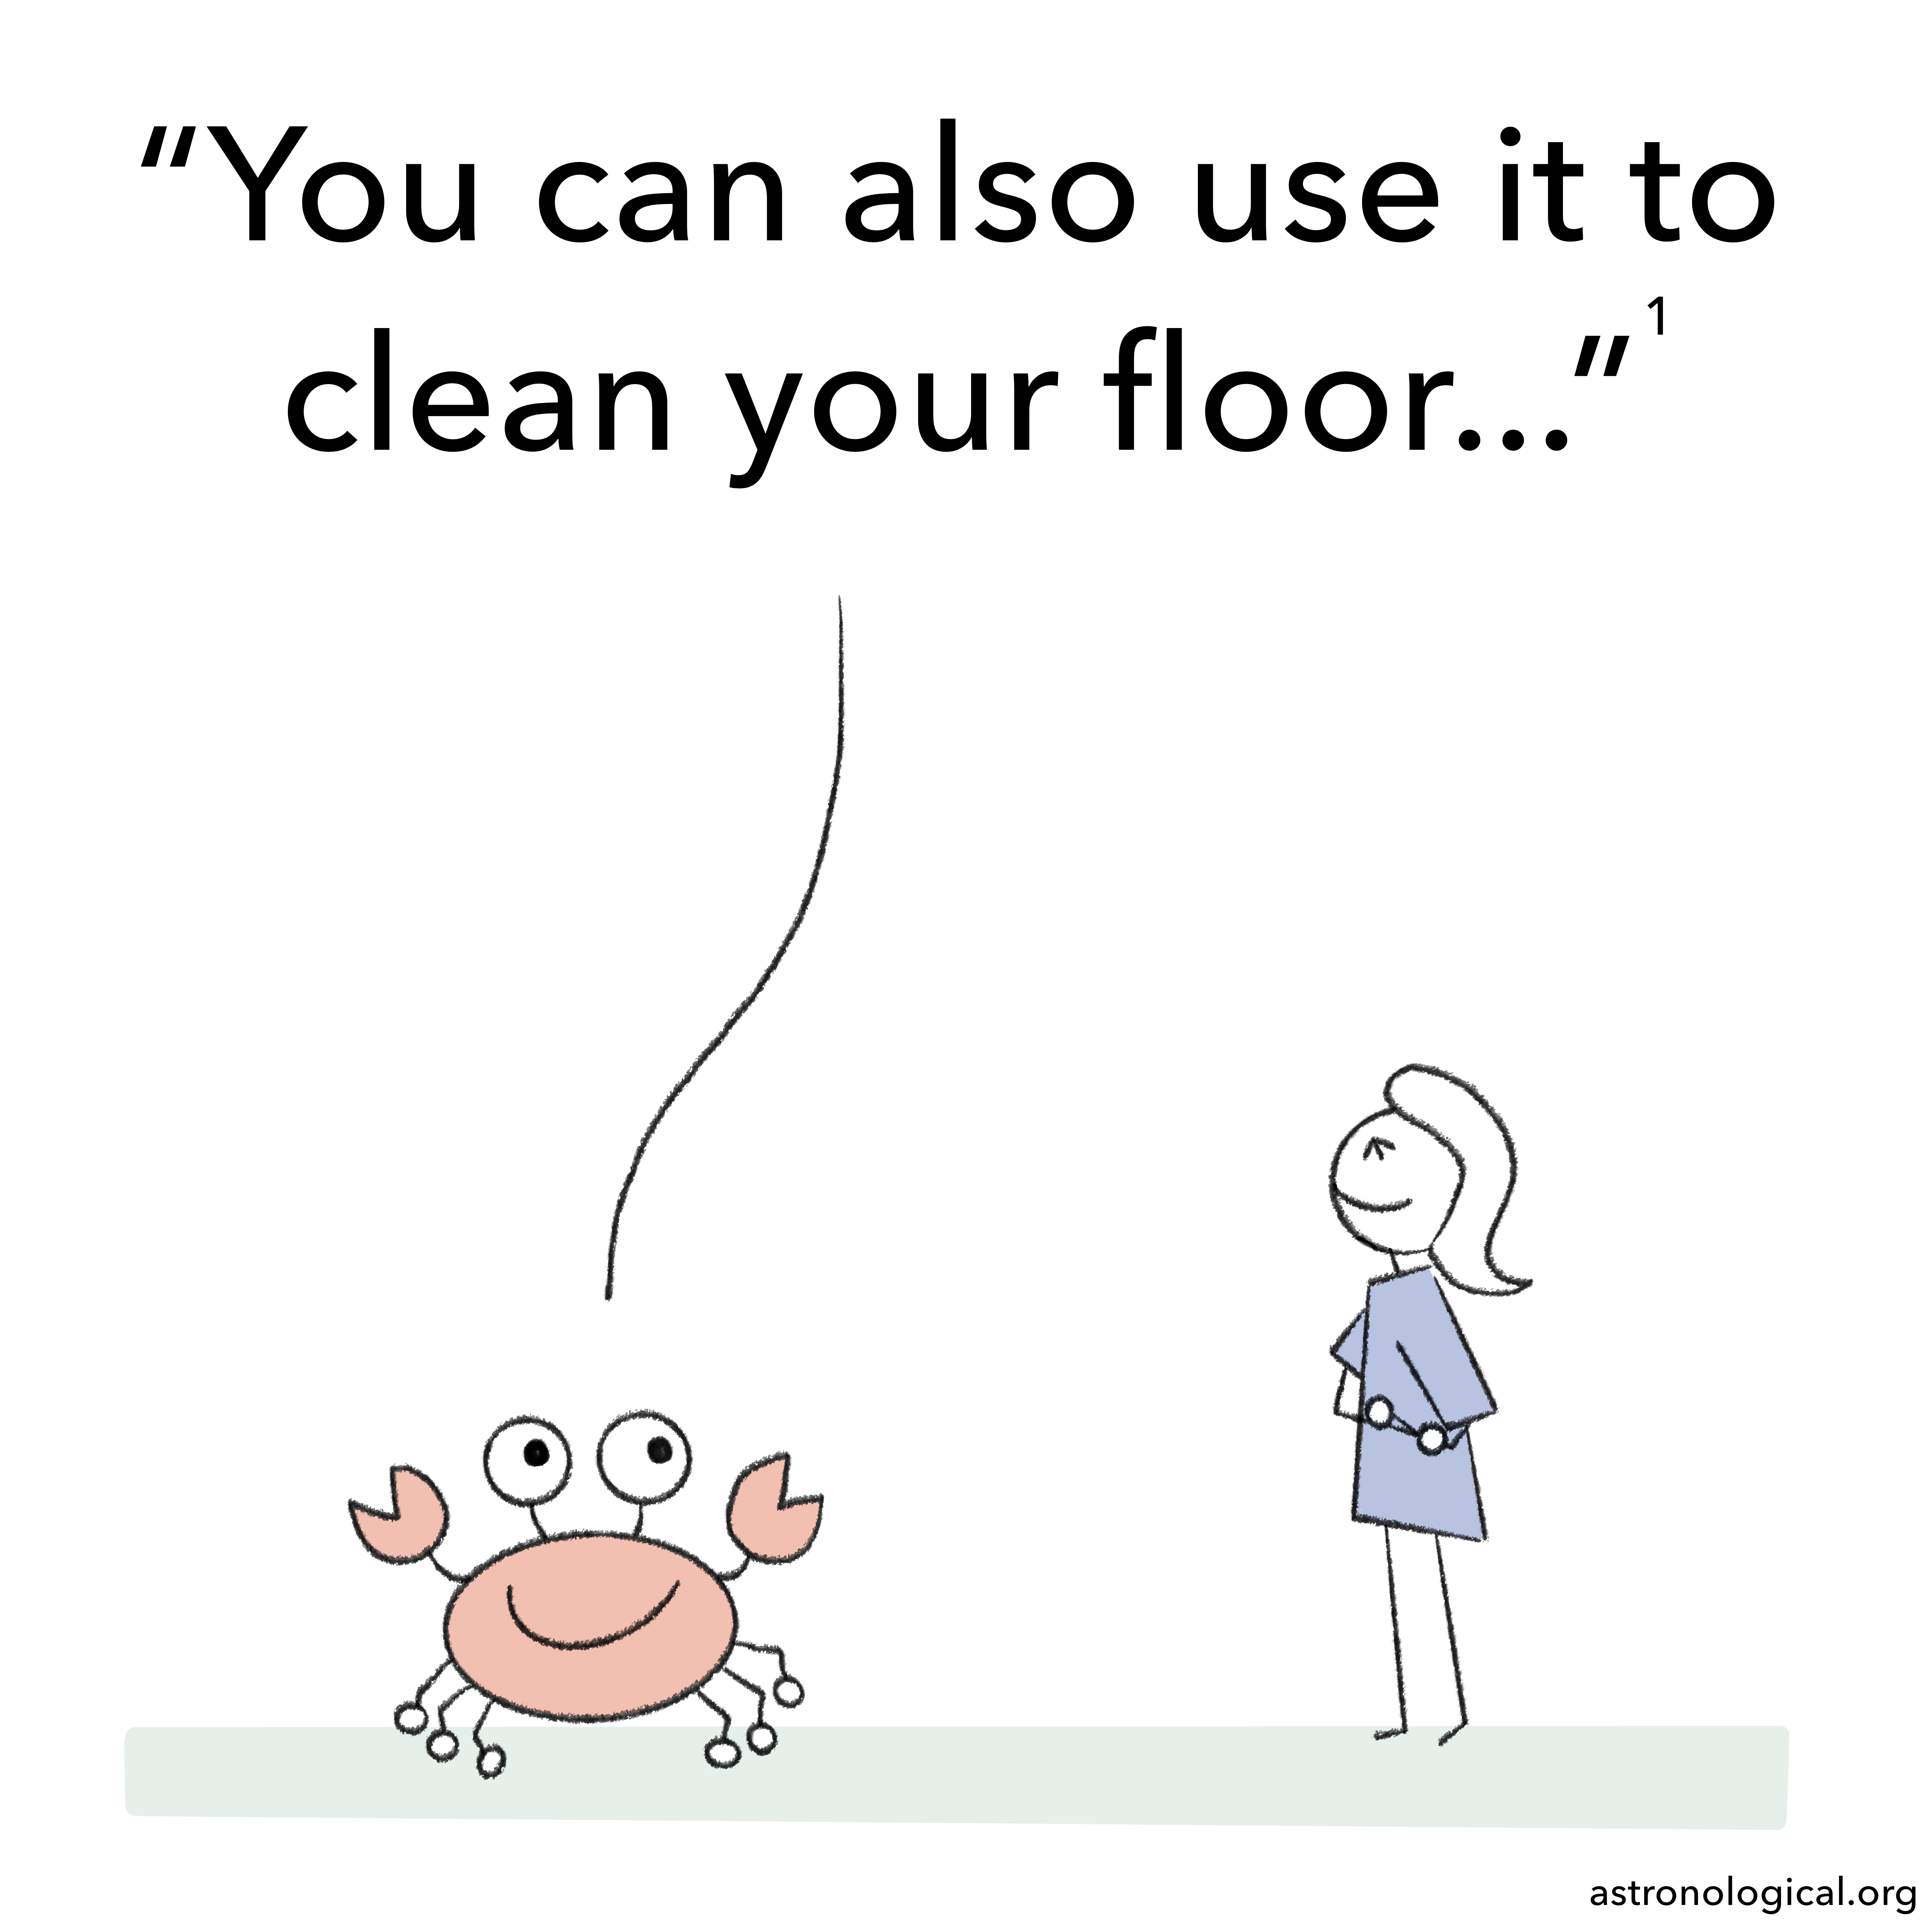 The crab continues: You can also use it to clean your floor. The girl’s head is thrown back, her eyes are closed and she is hugging her belly as she laughs.